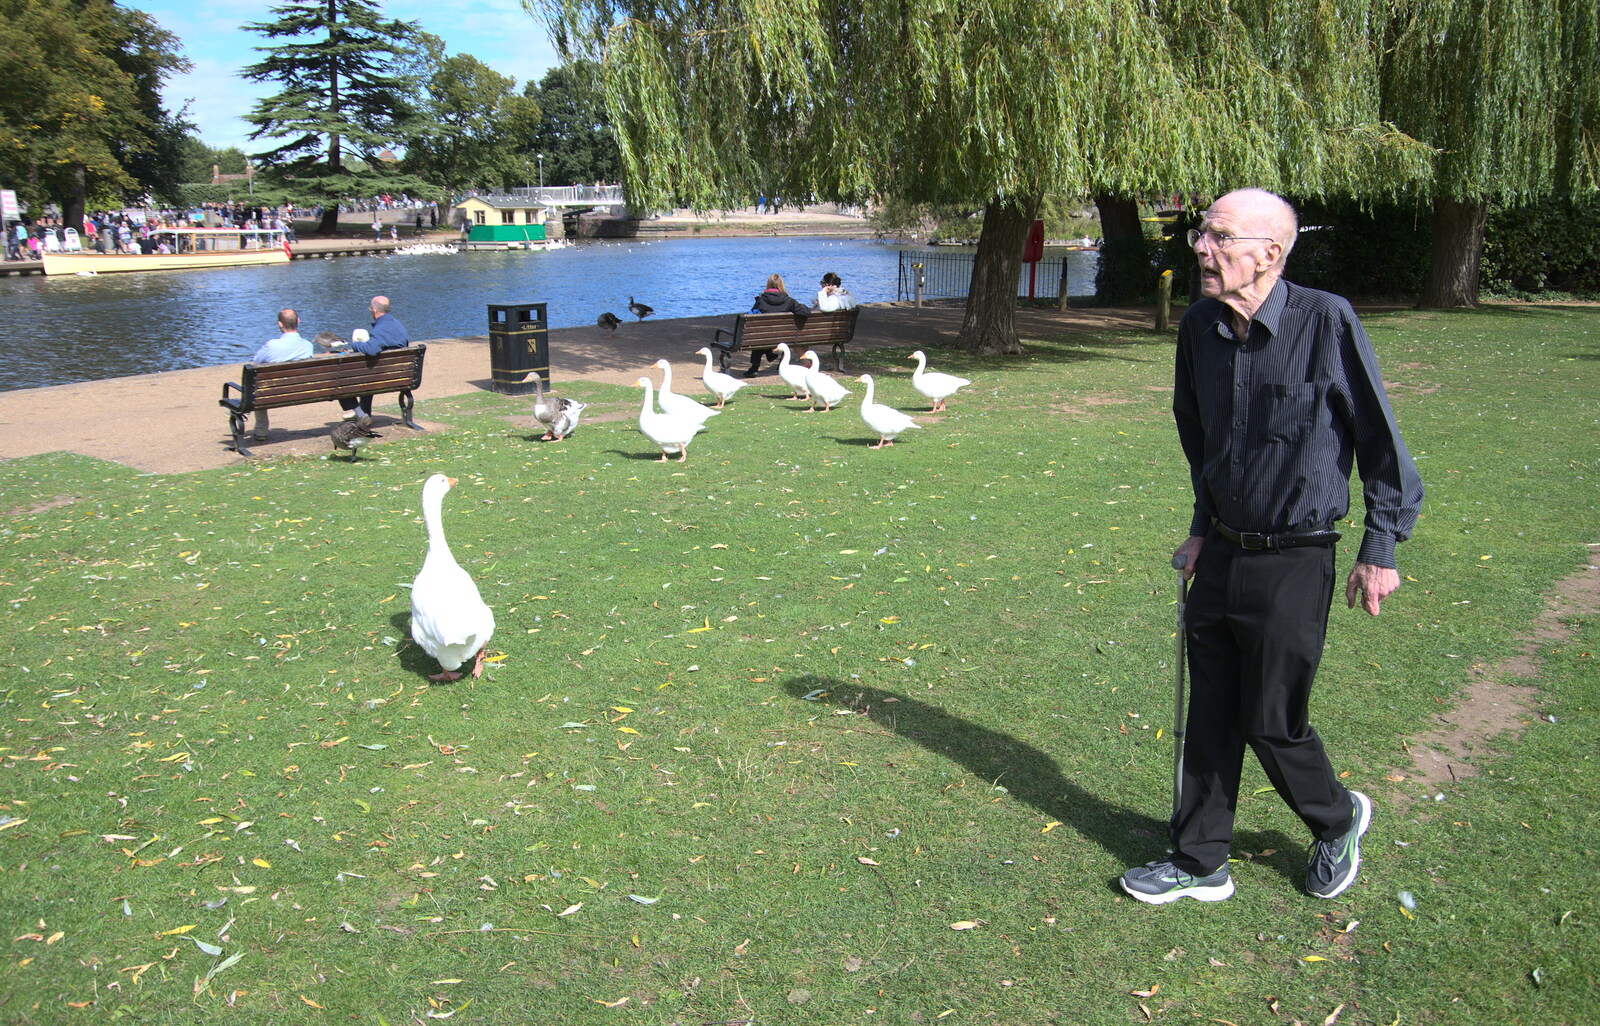 Grandad and the geese from A Postcard from Stratford-upon-Avon, Warwickshire - 9th September 2018